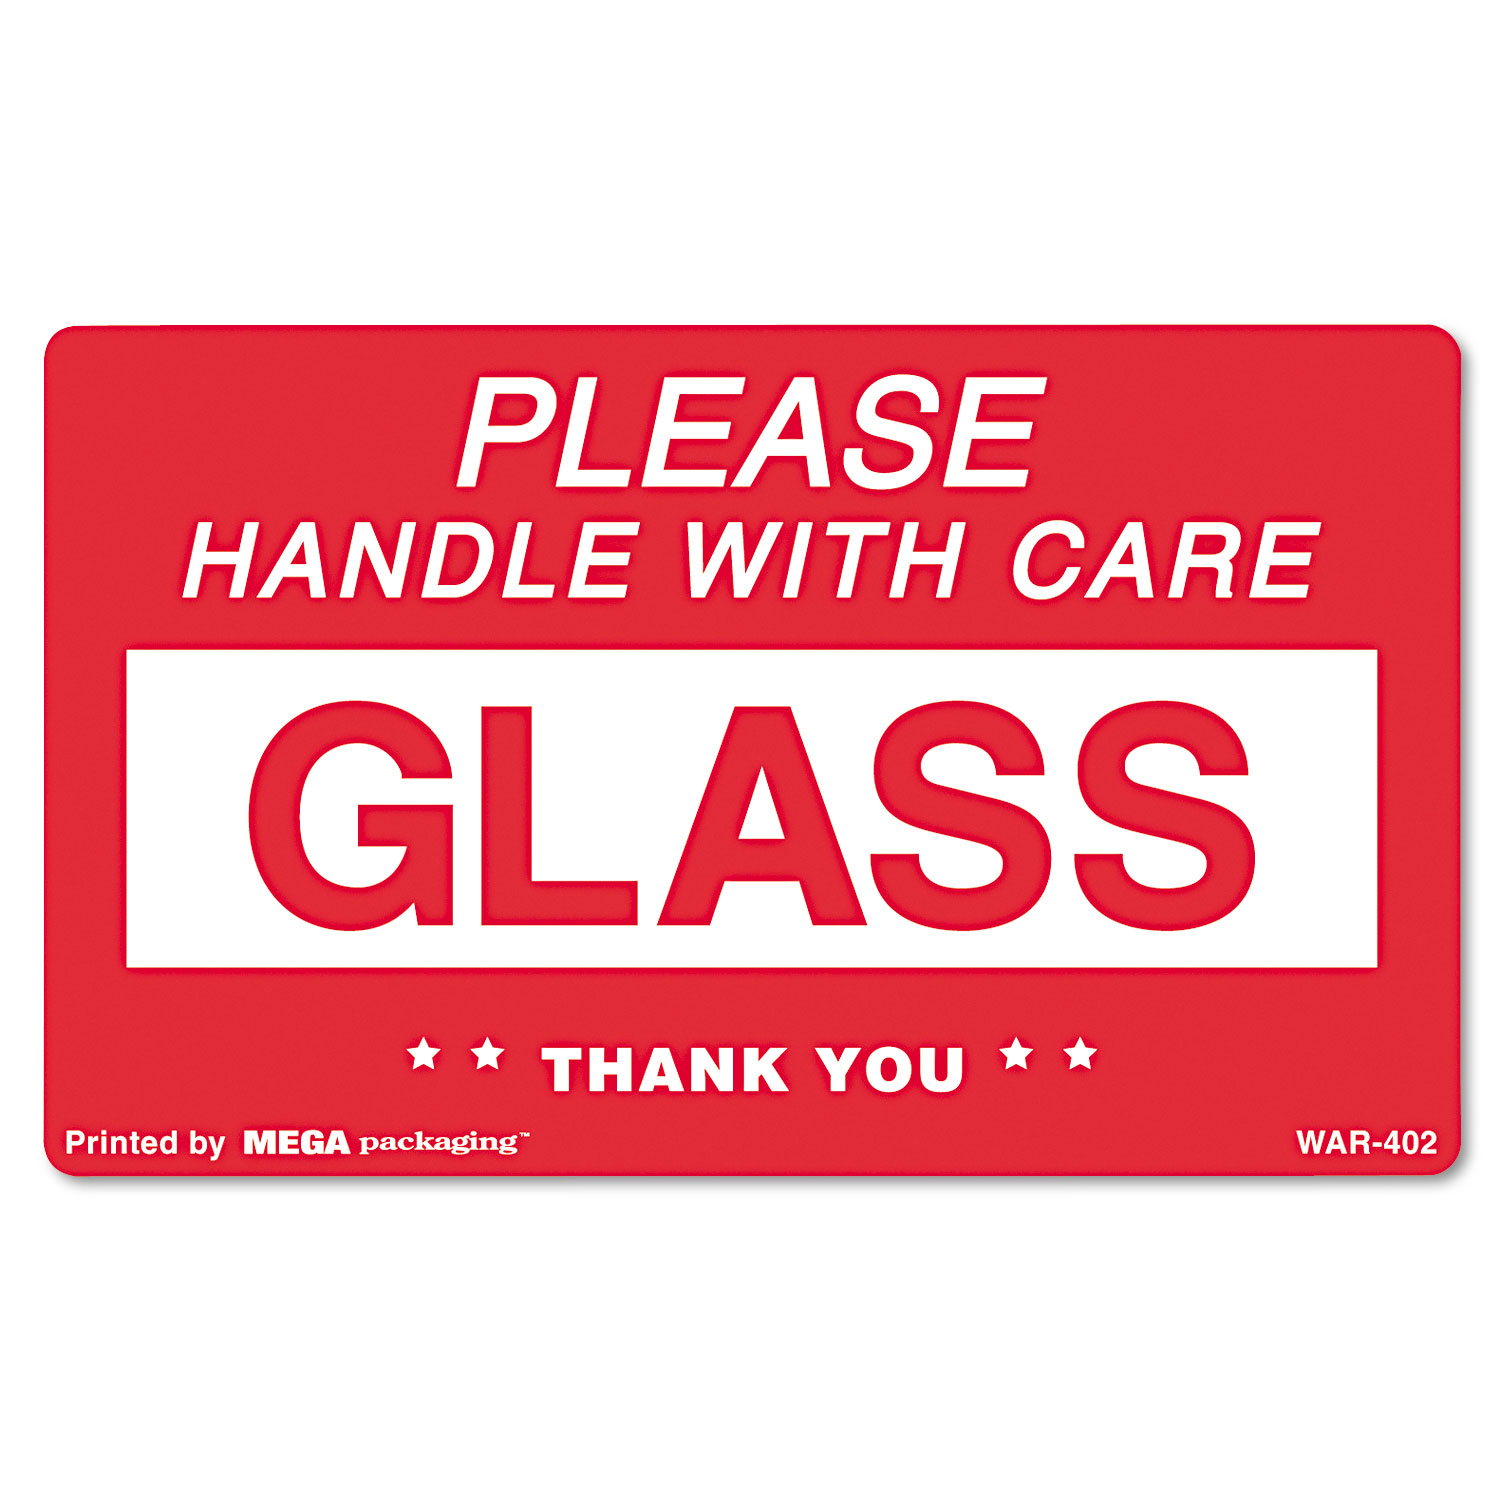 Universal® Printed Message Self-Adhesive Shipping Labels, FRAGILE Handle  with Care, 3 x 5, Red/Clear, 500/Roll